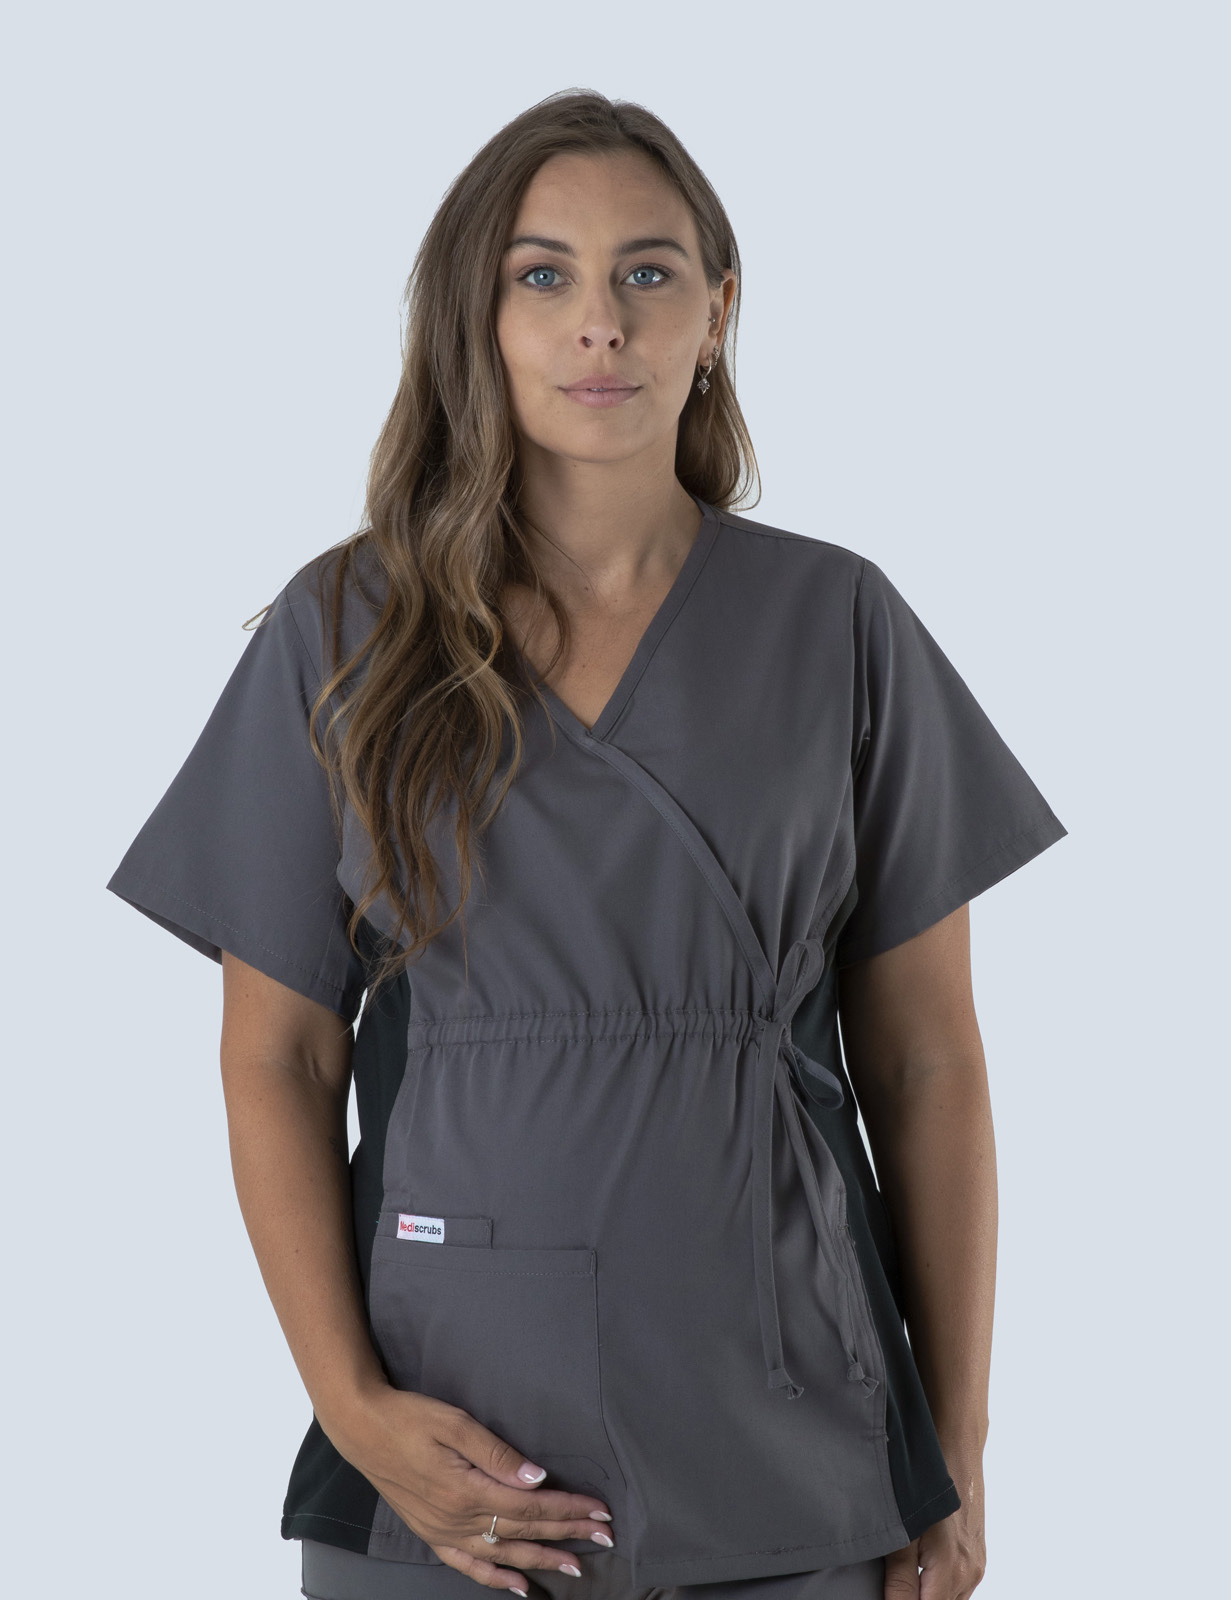 Maternity Scrub Top With Spandex Panel - Steel Grey - 4X large